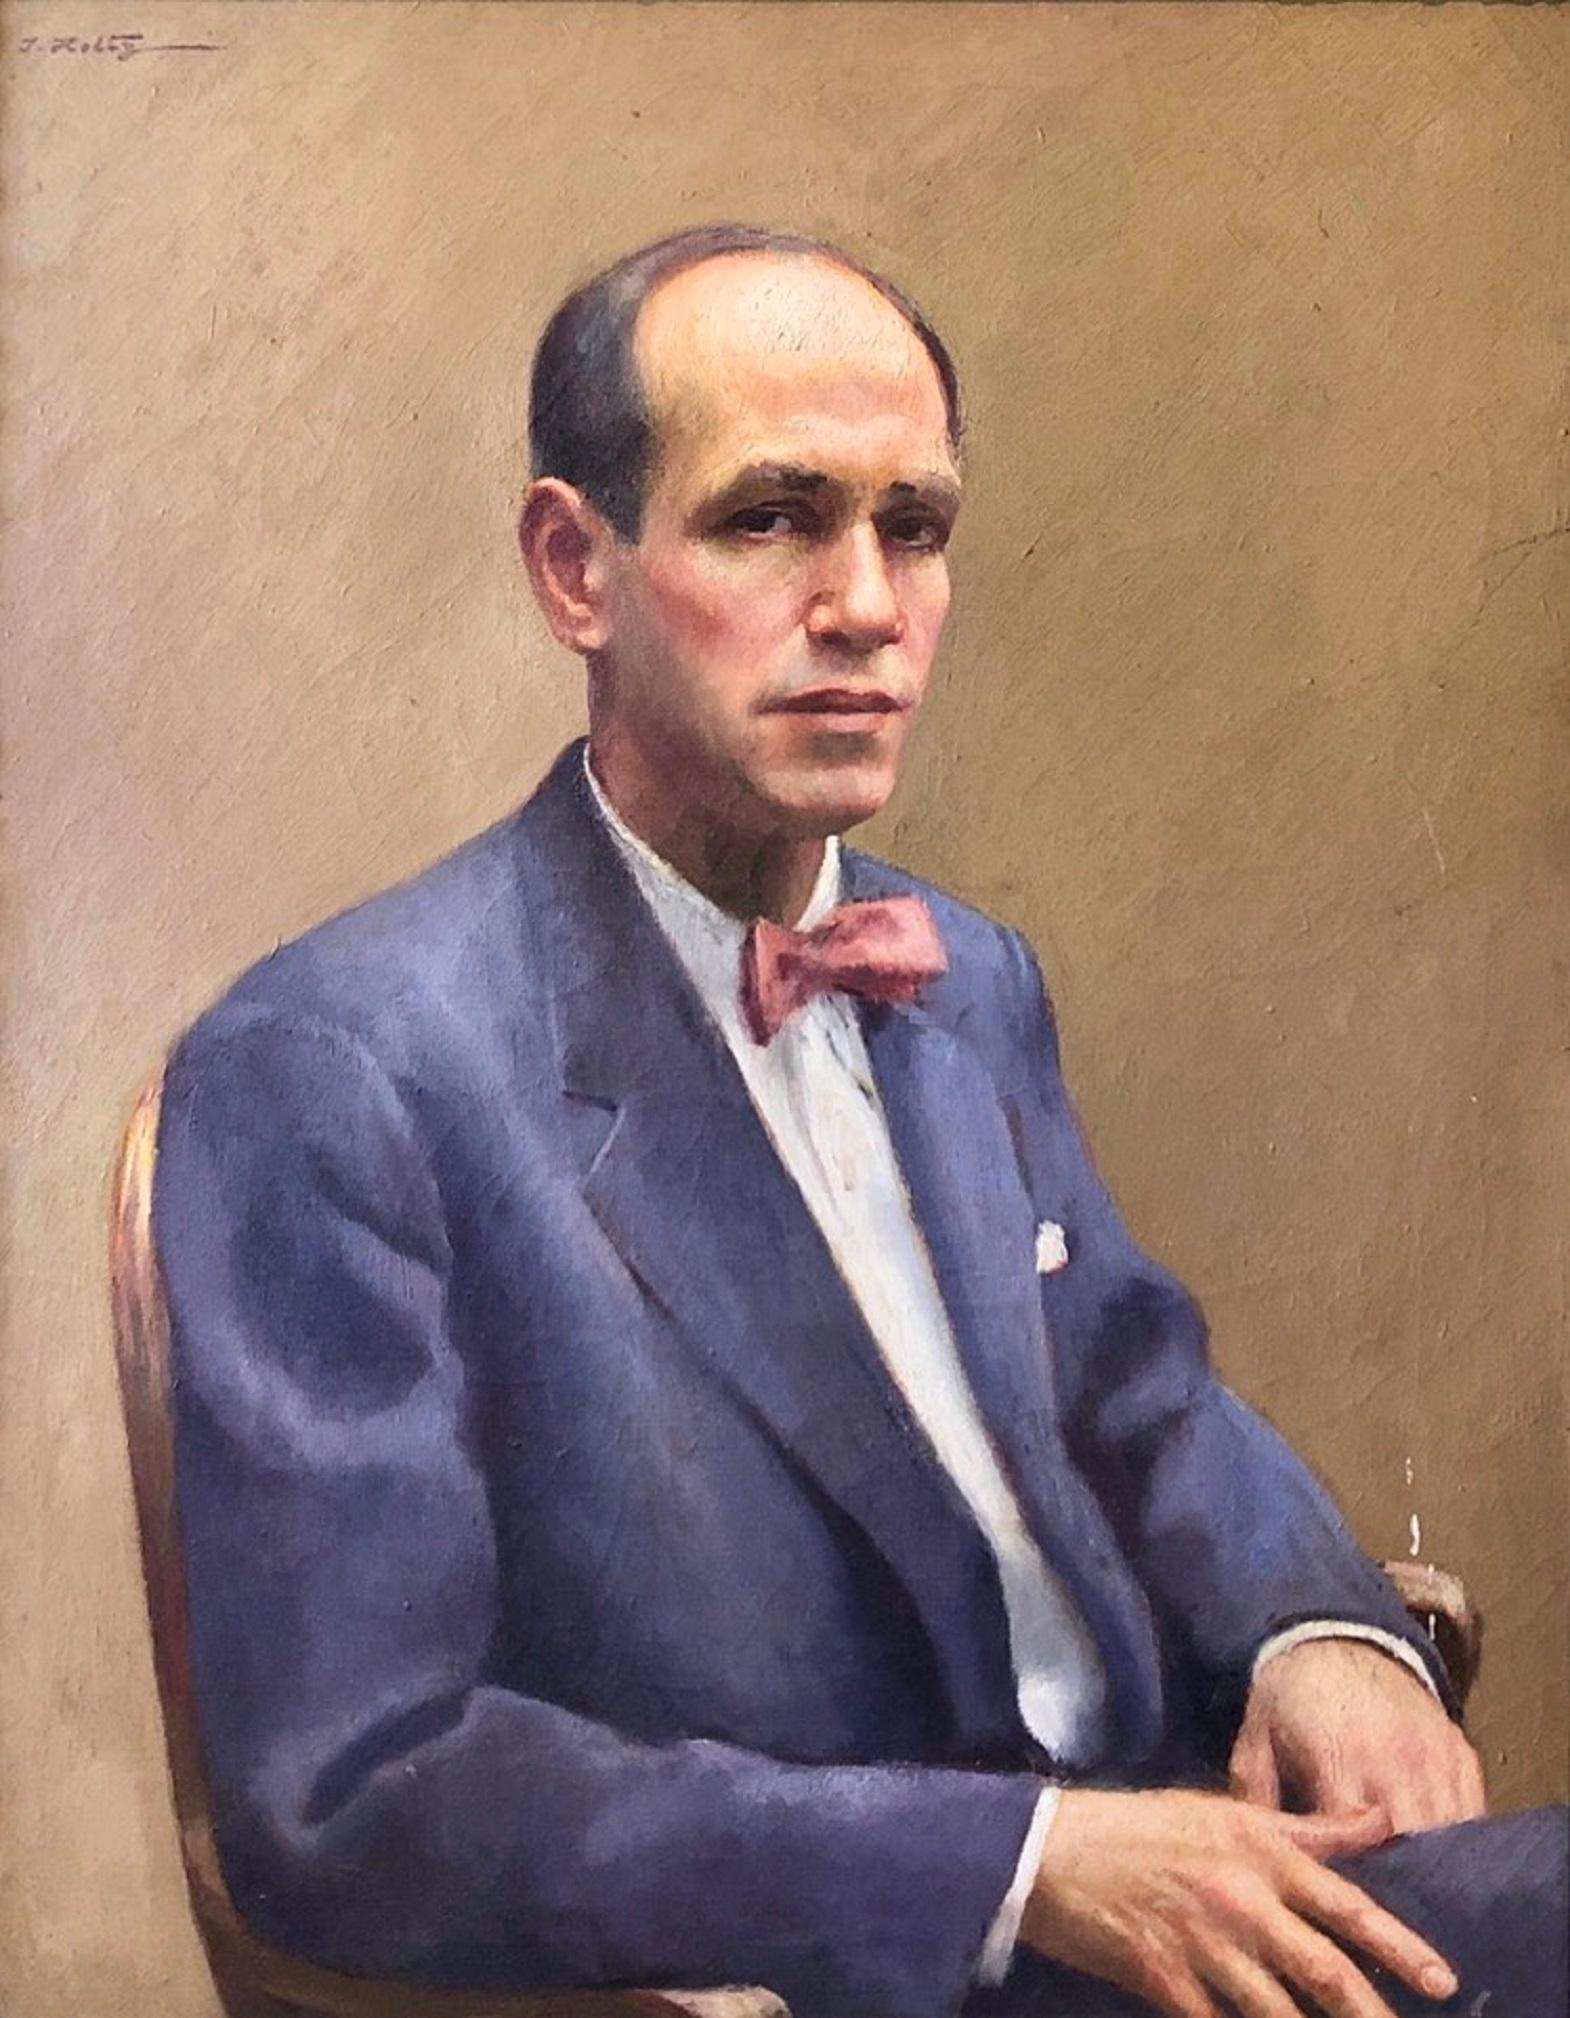 Oil Painting Portrait of Ashcan Artist John Sloan. Signed I. Holtz.
The youngest of four children, Holtz was born and spent his early childhood in Skierniewice, Poland, a small town near Warsaw. His father was a hat maker and a furrier. In 1935,